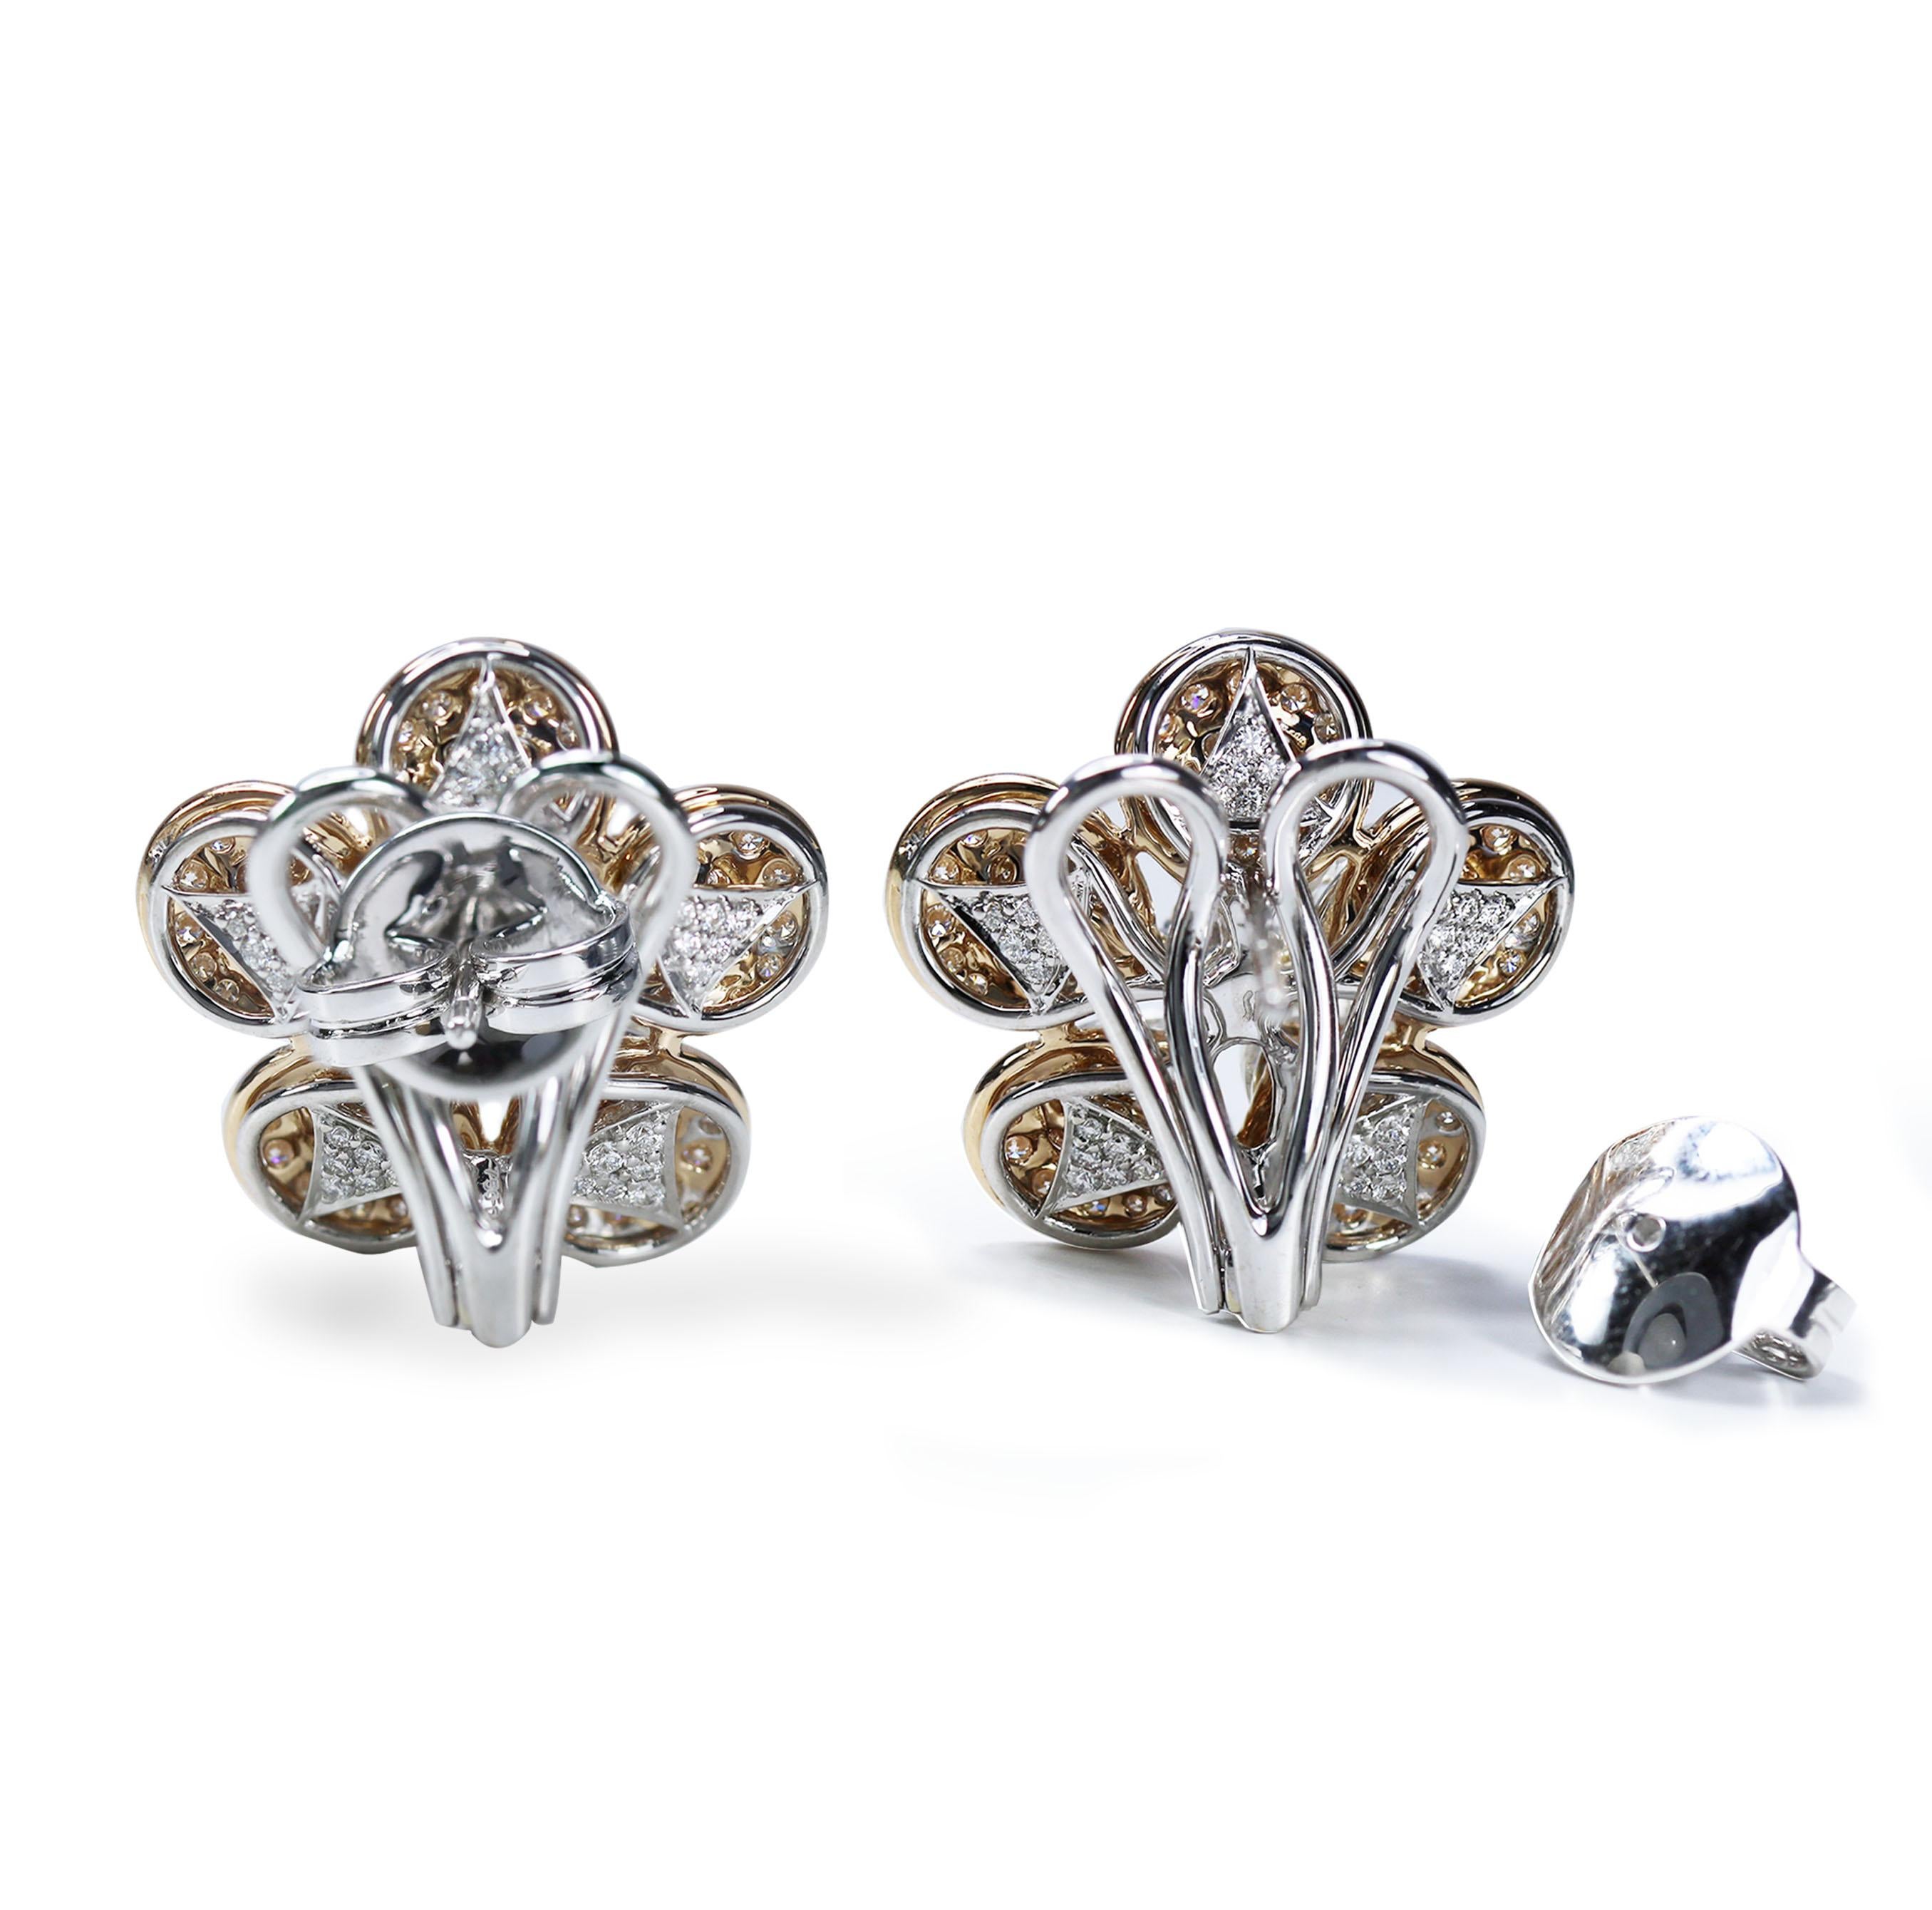 F-G-H/ VS-SI Brilliant cut and Rosecut Diamond Earrings

Inhale the alluring essence of nature with this graceful pair of floral motif earrings stylised in 18K white and rose gold. Adorned with F-G-H, VS-SI brilliant cut and rosecut diamonds, this